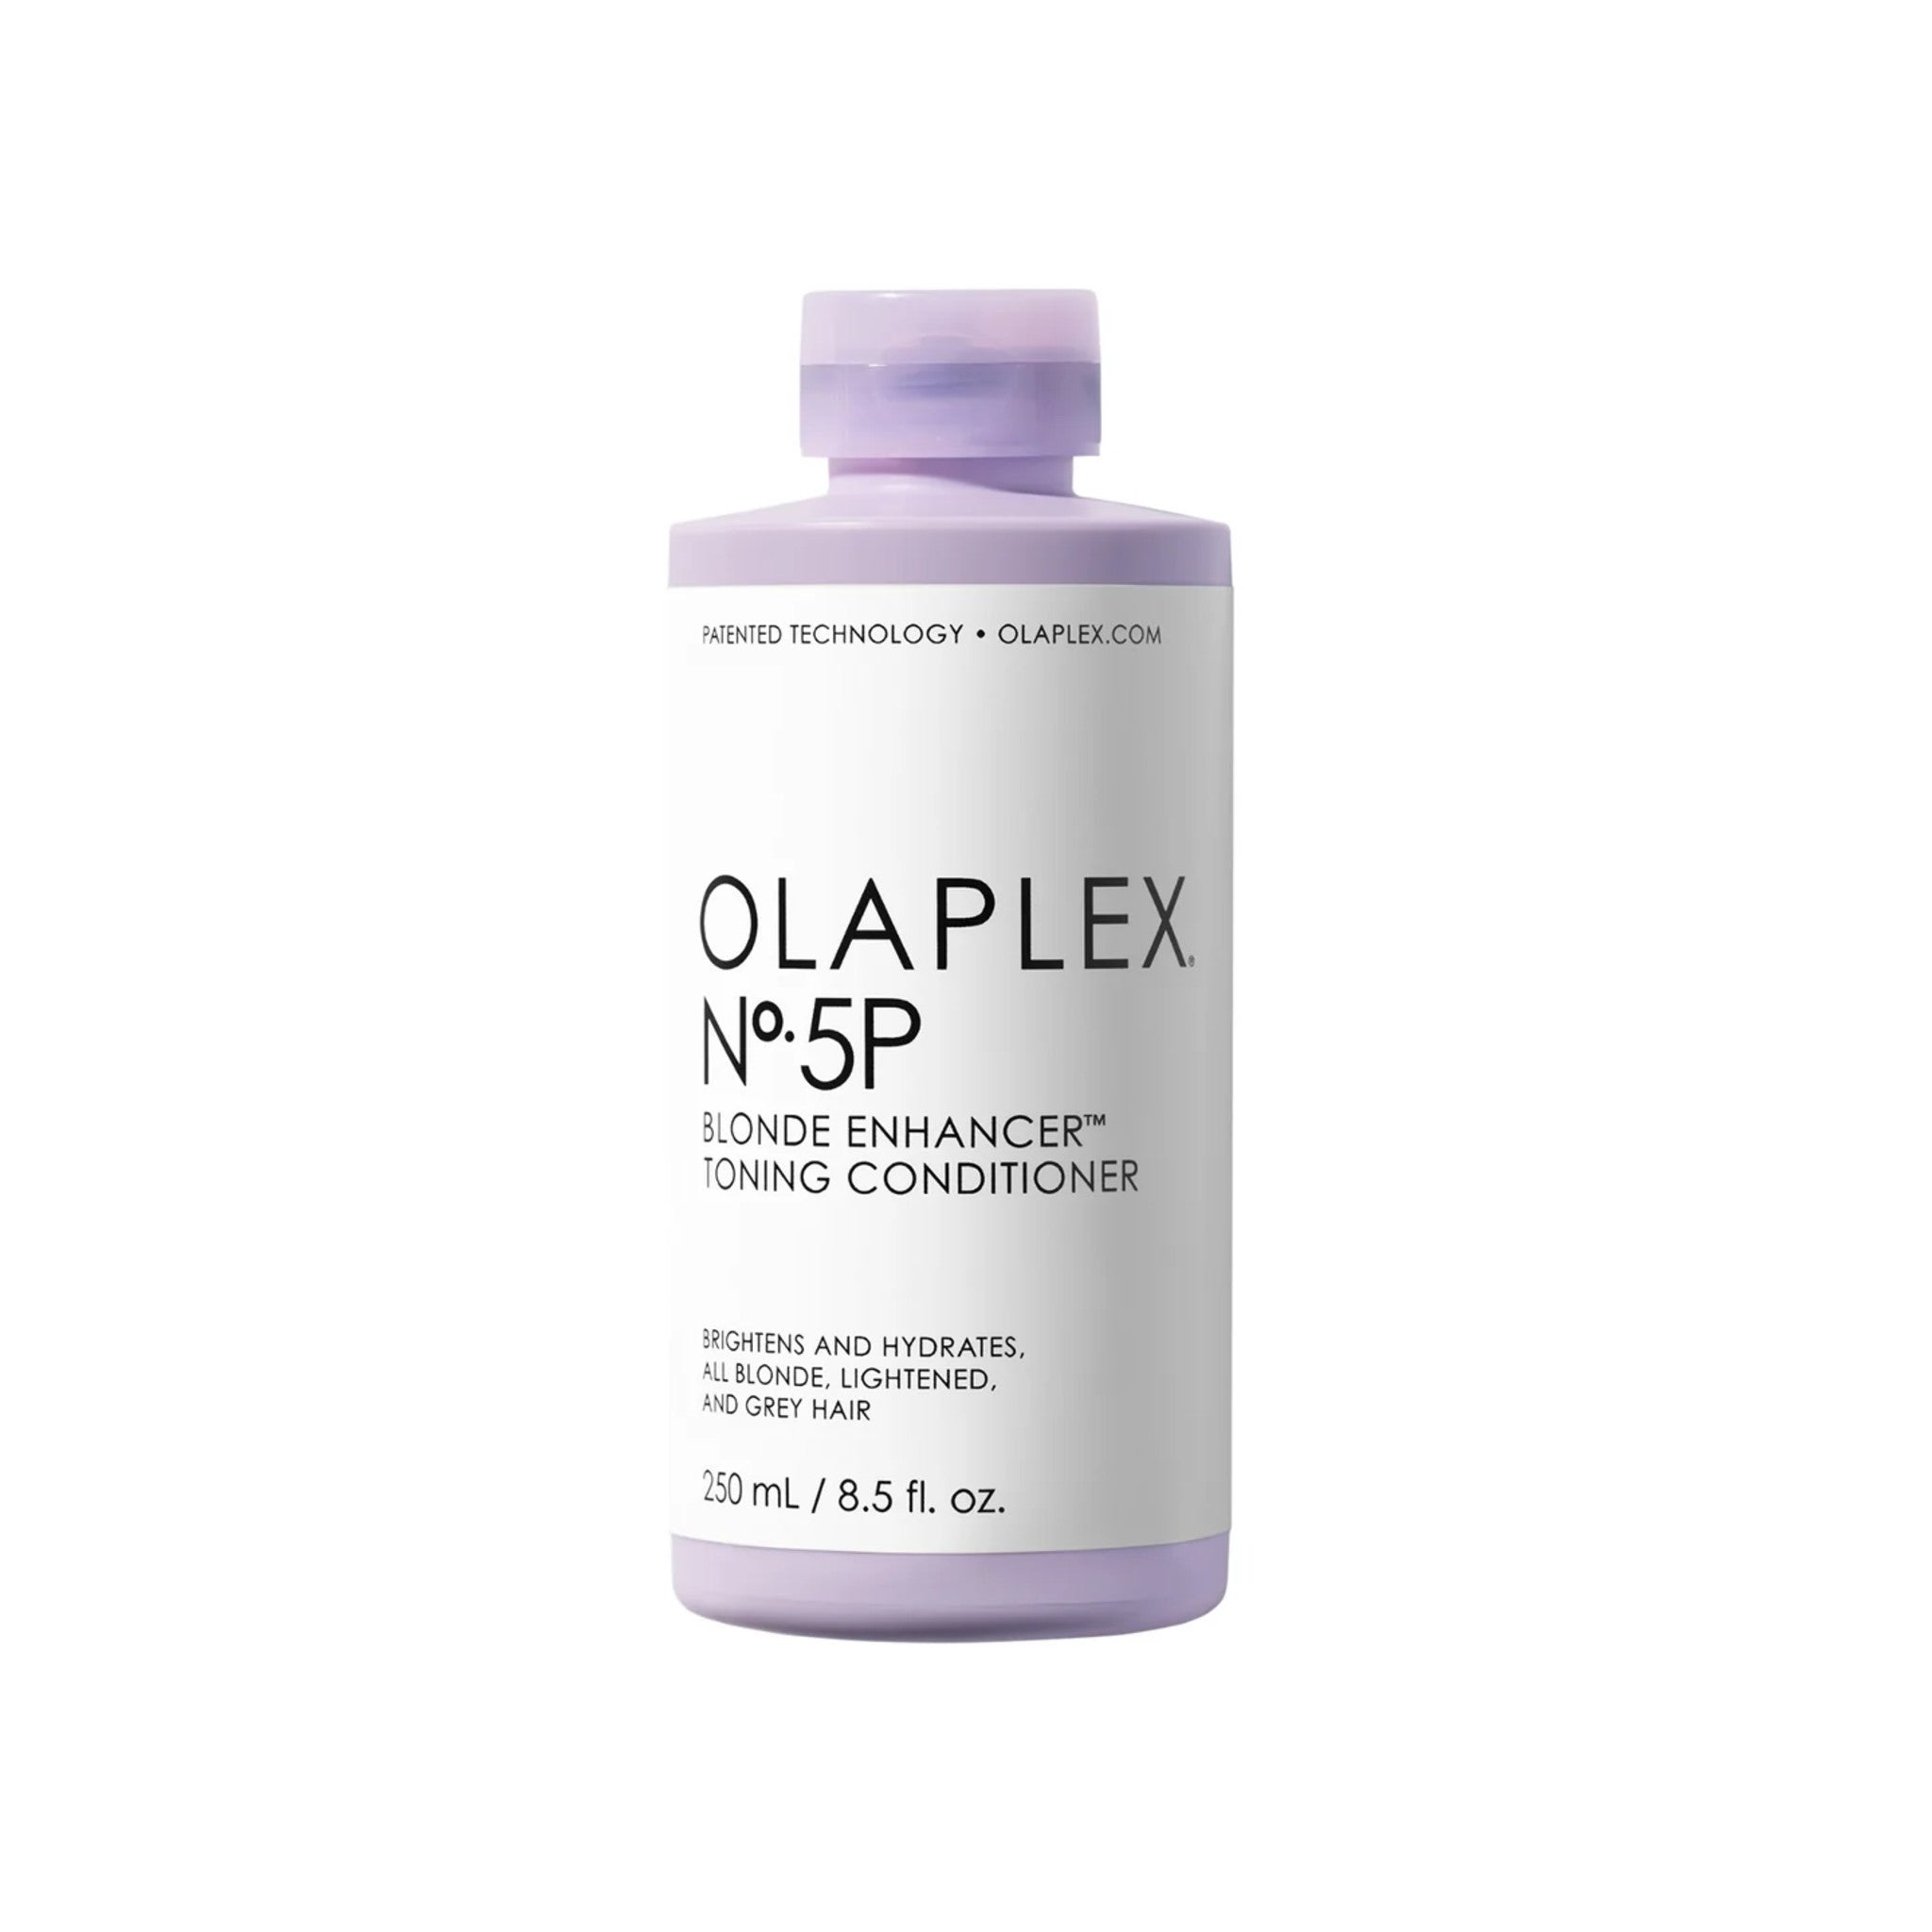 Olaplex No.5P Blonde Enhancer Toning Conditioner main image. This product is for blonde hair